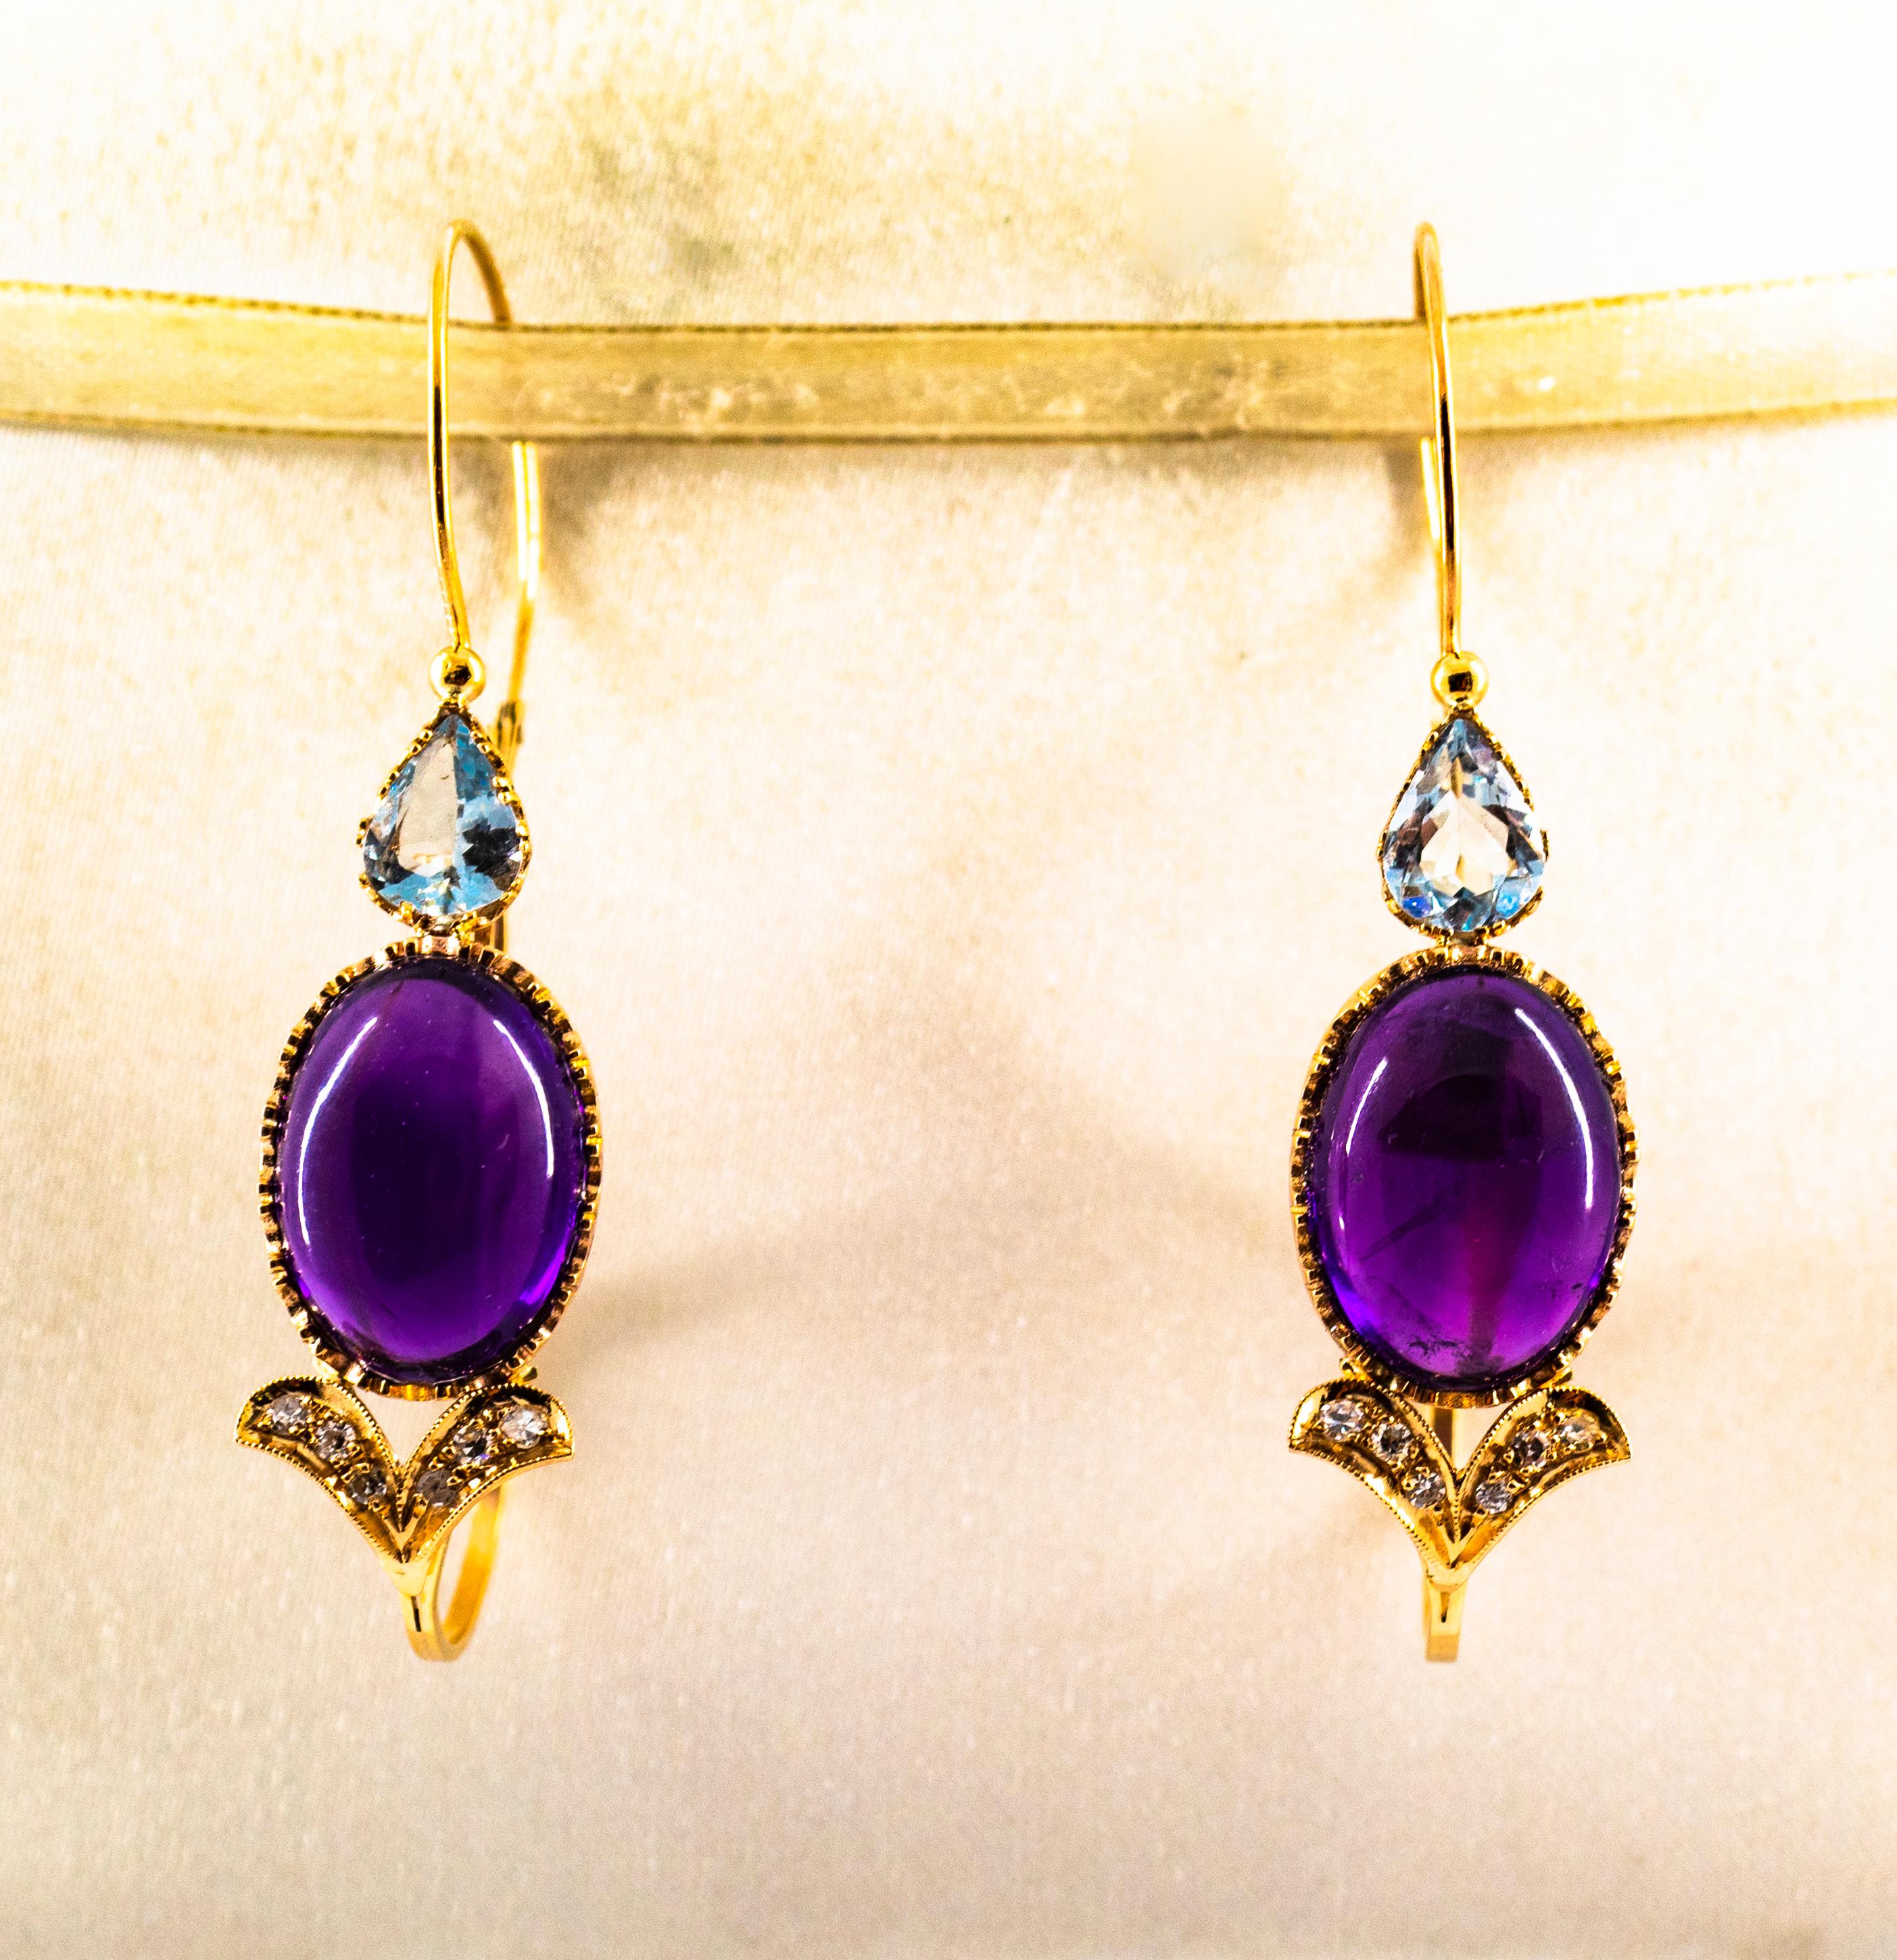 These Earrings are made of 9K Yellow Gold.
These Earrings have 0.30 Carats of White Modern Round Cut Diamonds.
These Earrings have 2.80 Carats of Aquamarines.
These Earrings have 12.25 Carats of Cabochon Cut Amethysts.
These Earrings are inspired by